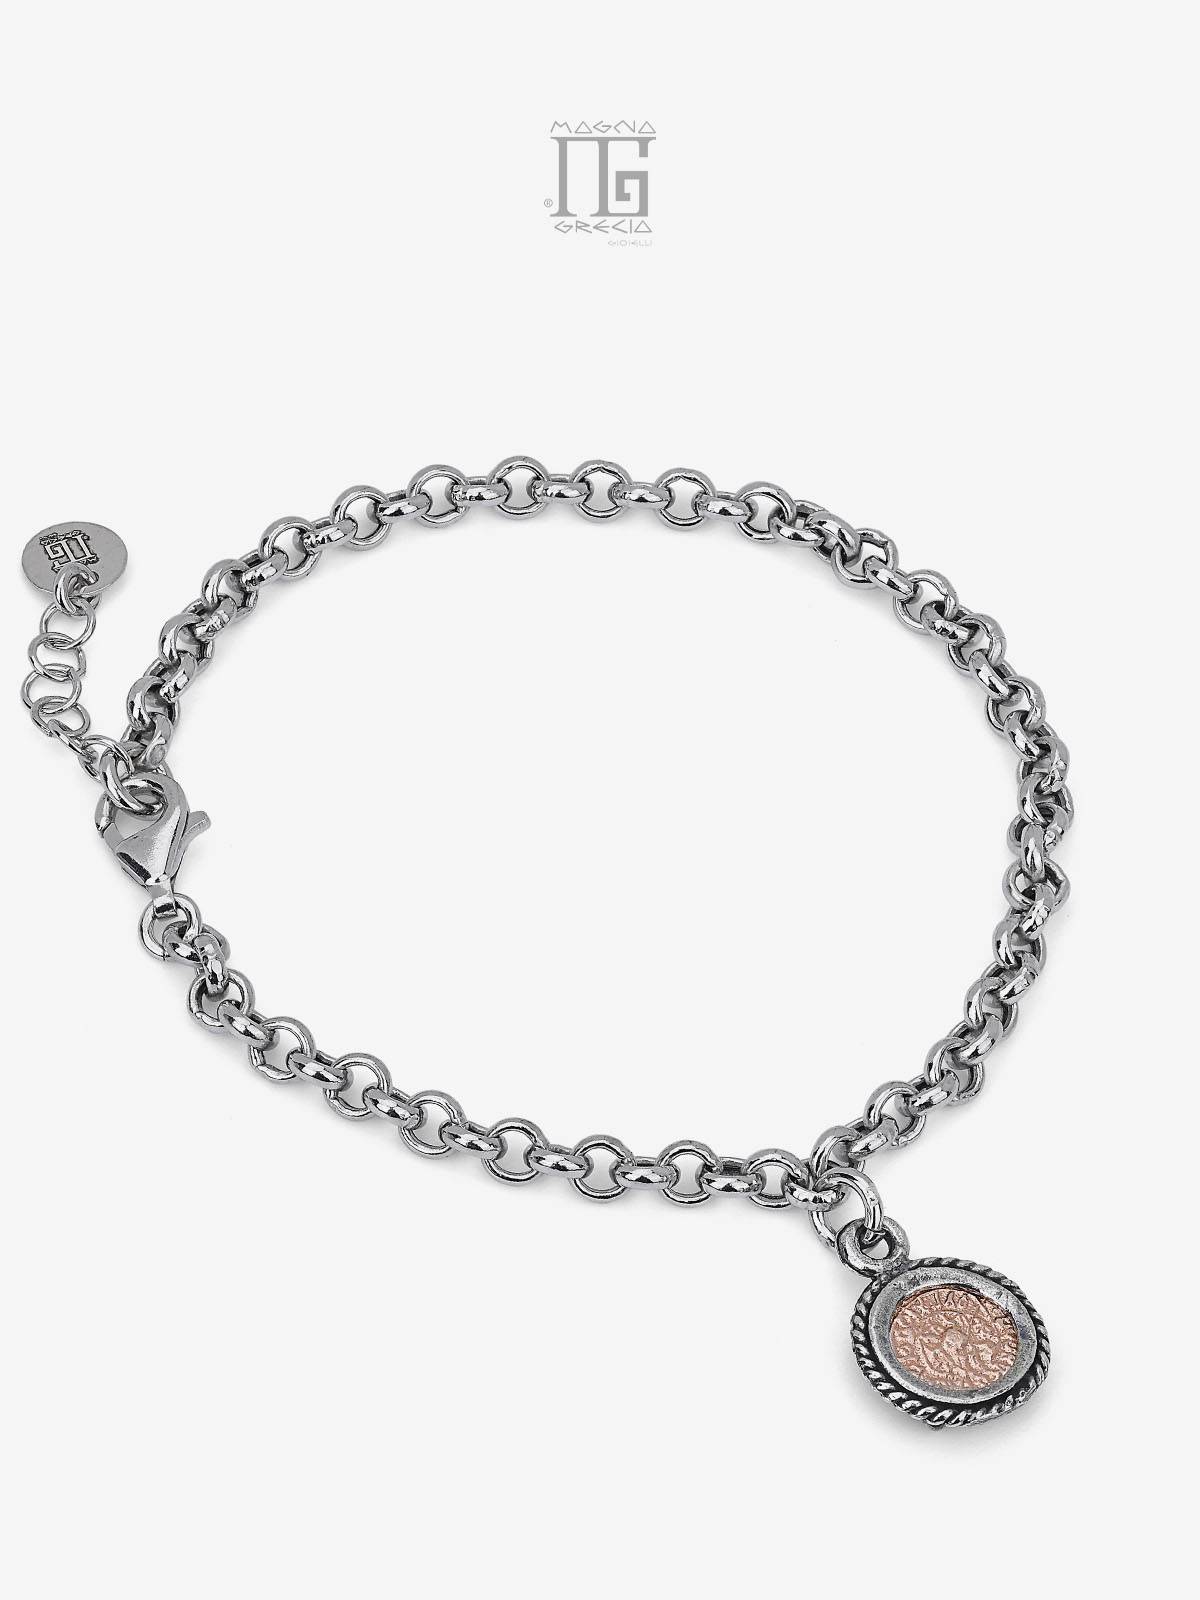 Silver bracelet with coin depicting the Phaistos Disc Cod. MGK 4247 V